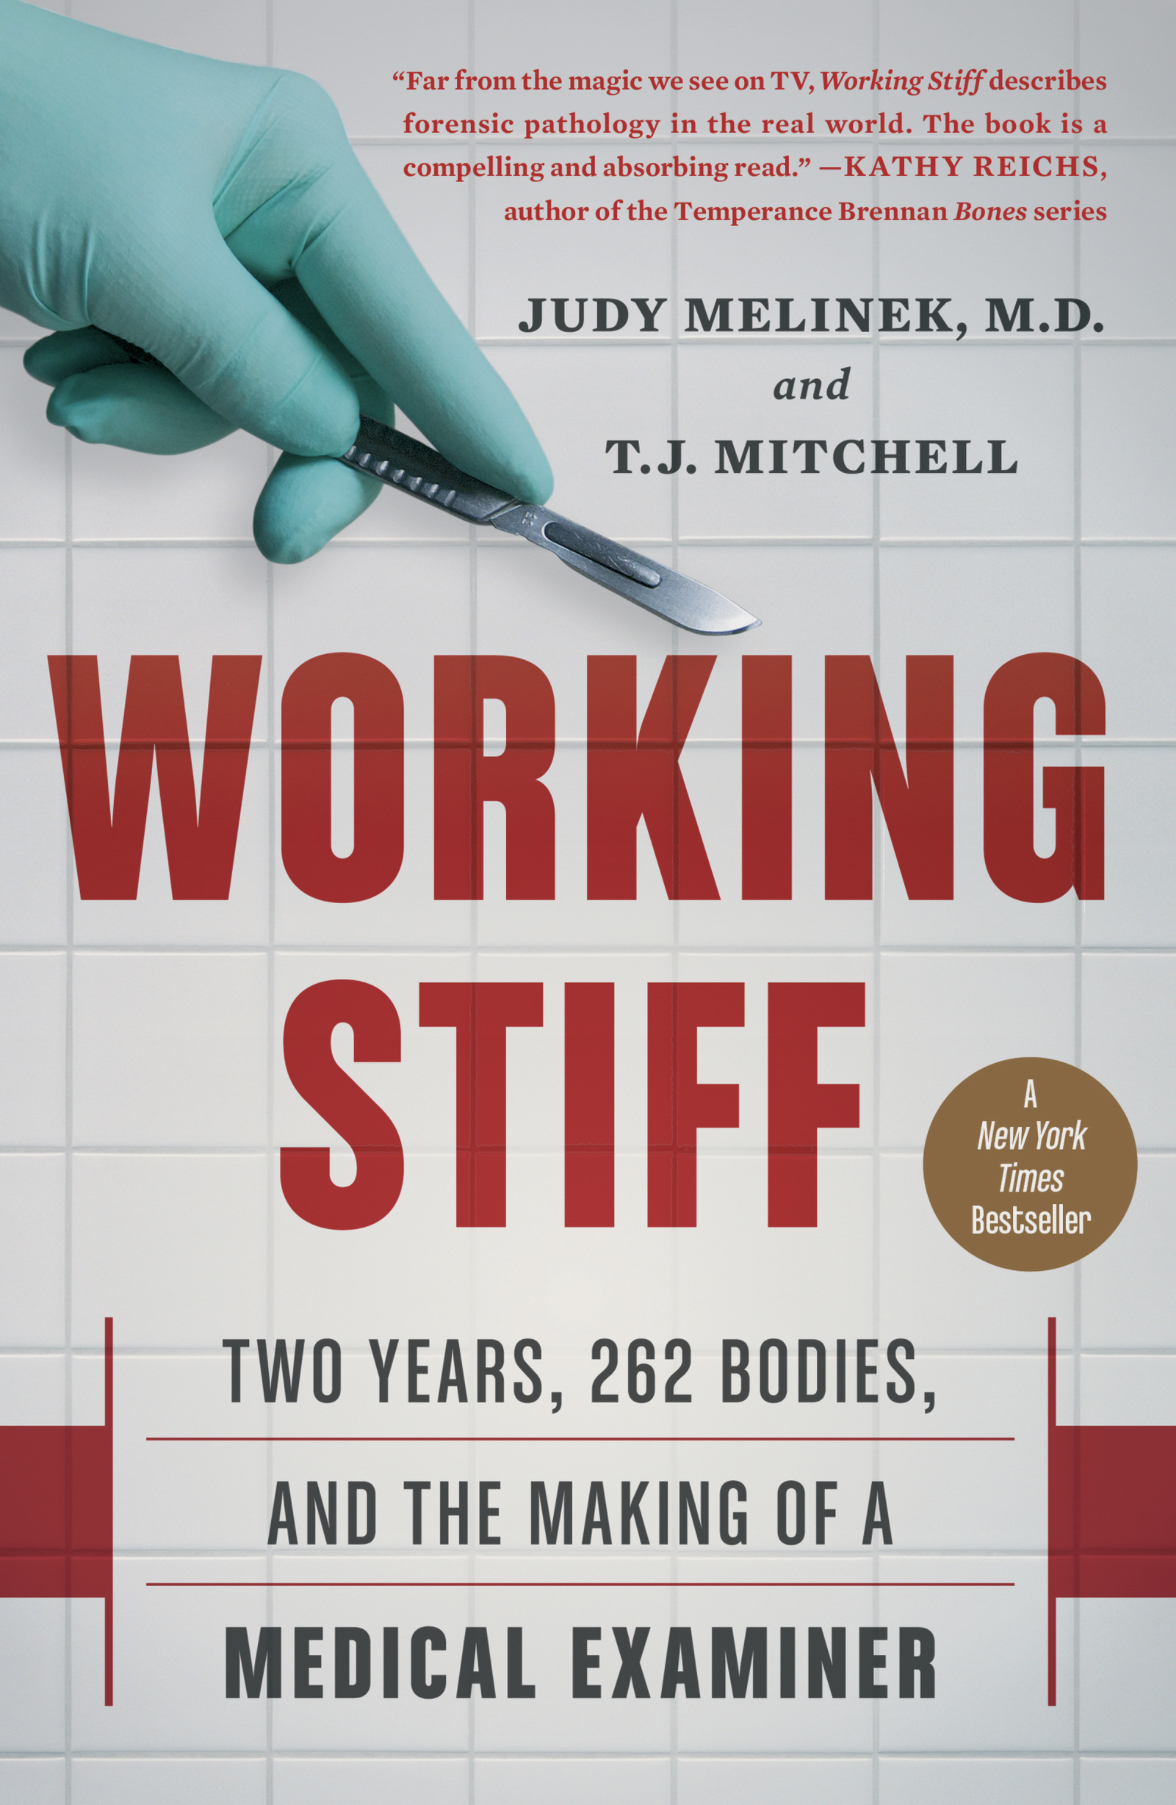 Judy Melinek: Working stiff : two years, 262 bodies, and the making of a medical examiner